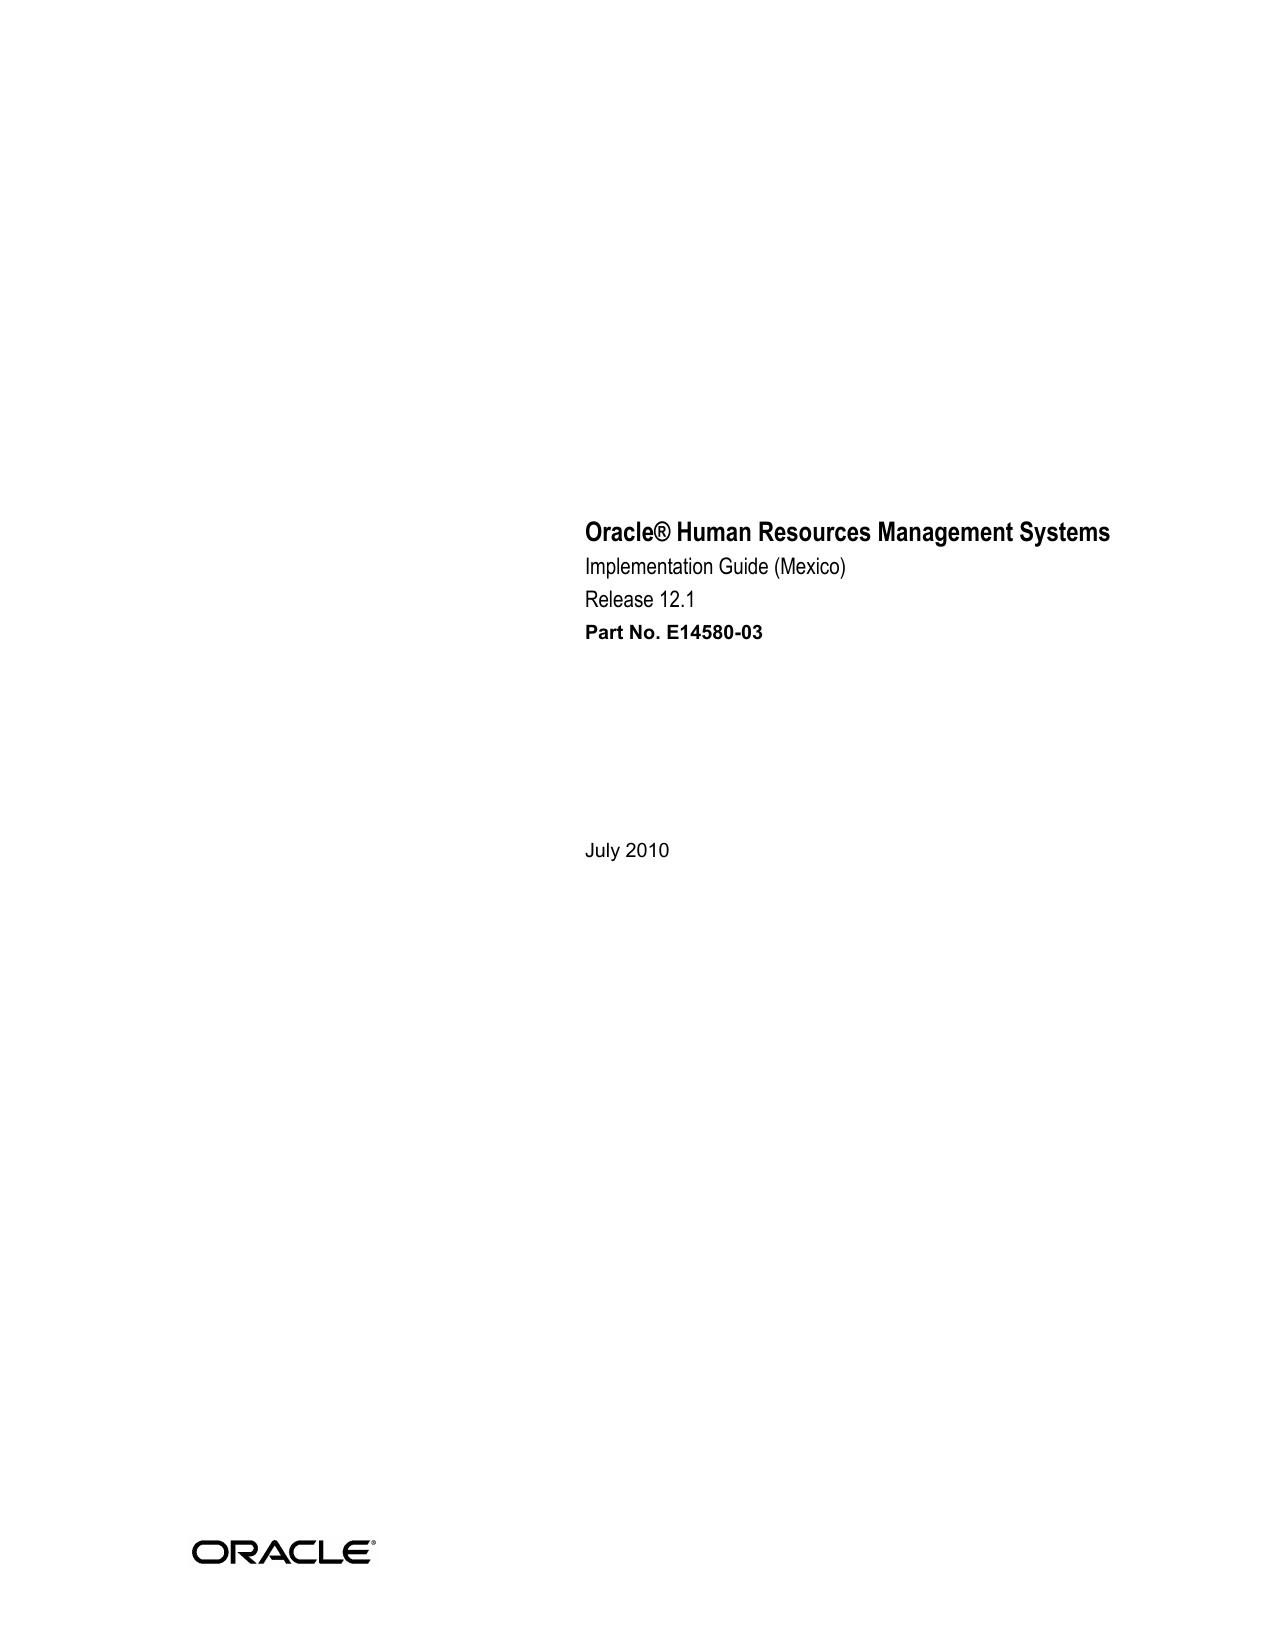 Oracle® Human Resources Management Systems 2010